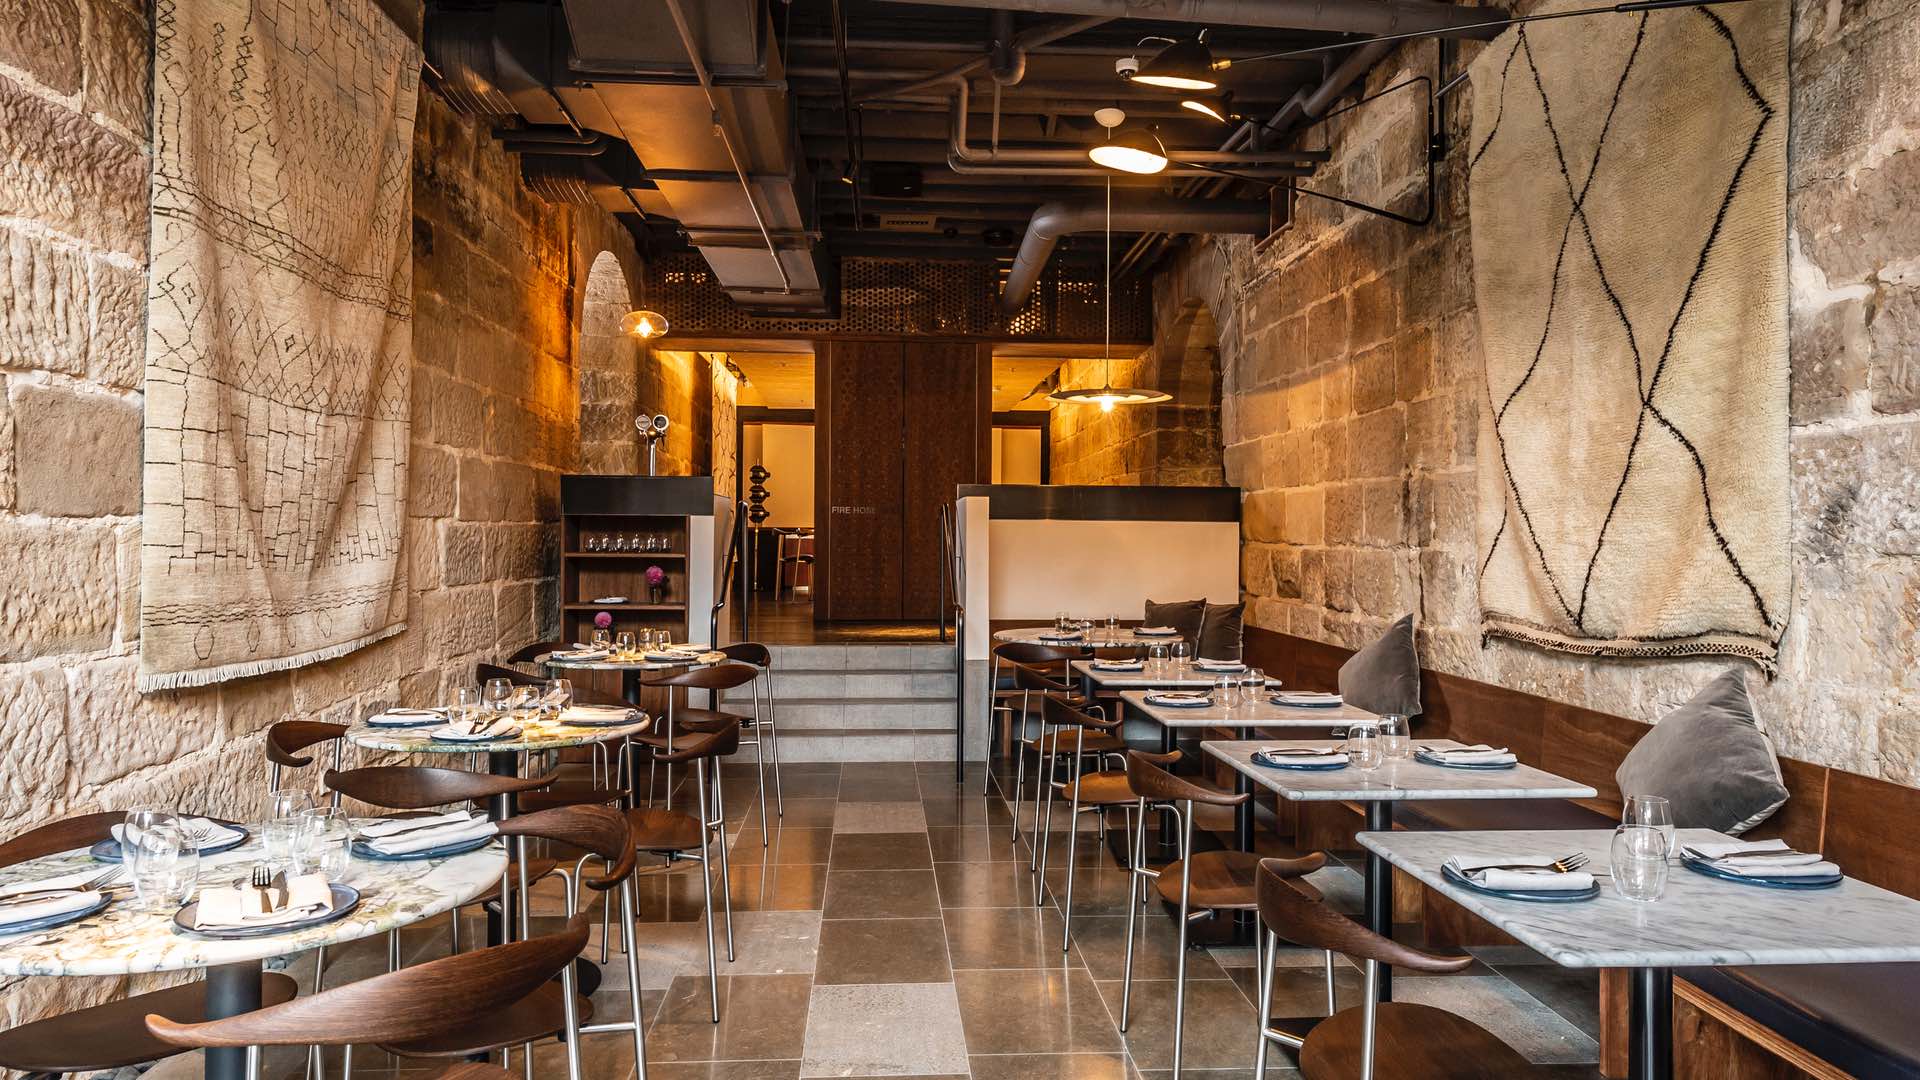 Tayim Is Sydney's New Middle Eastern Restaurant Tucked Away in a Sandstone Building in The Rocks